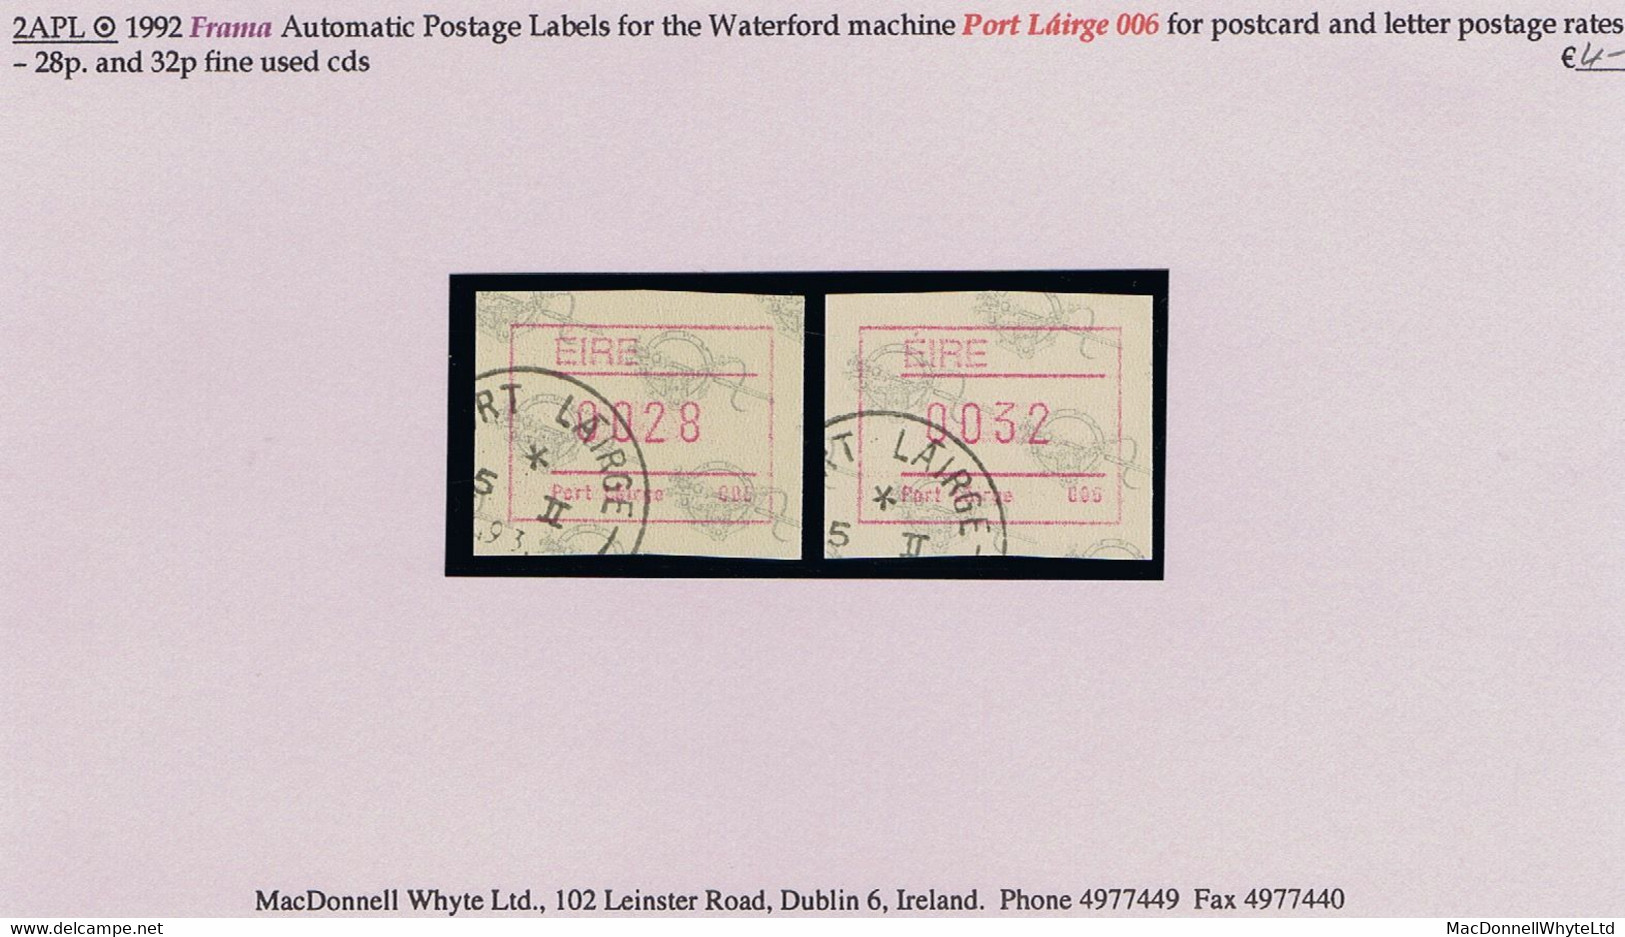 Ireland 1992 Frama Automatic Postage Labels For Waterford 006 Machine 28p Postcard Rate And 32p Letter Rate Fine Used - Affrancature Meccaniche/Frama